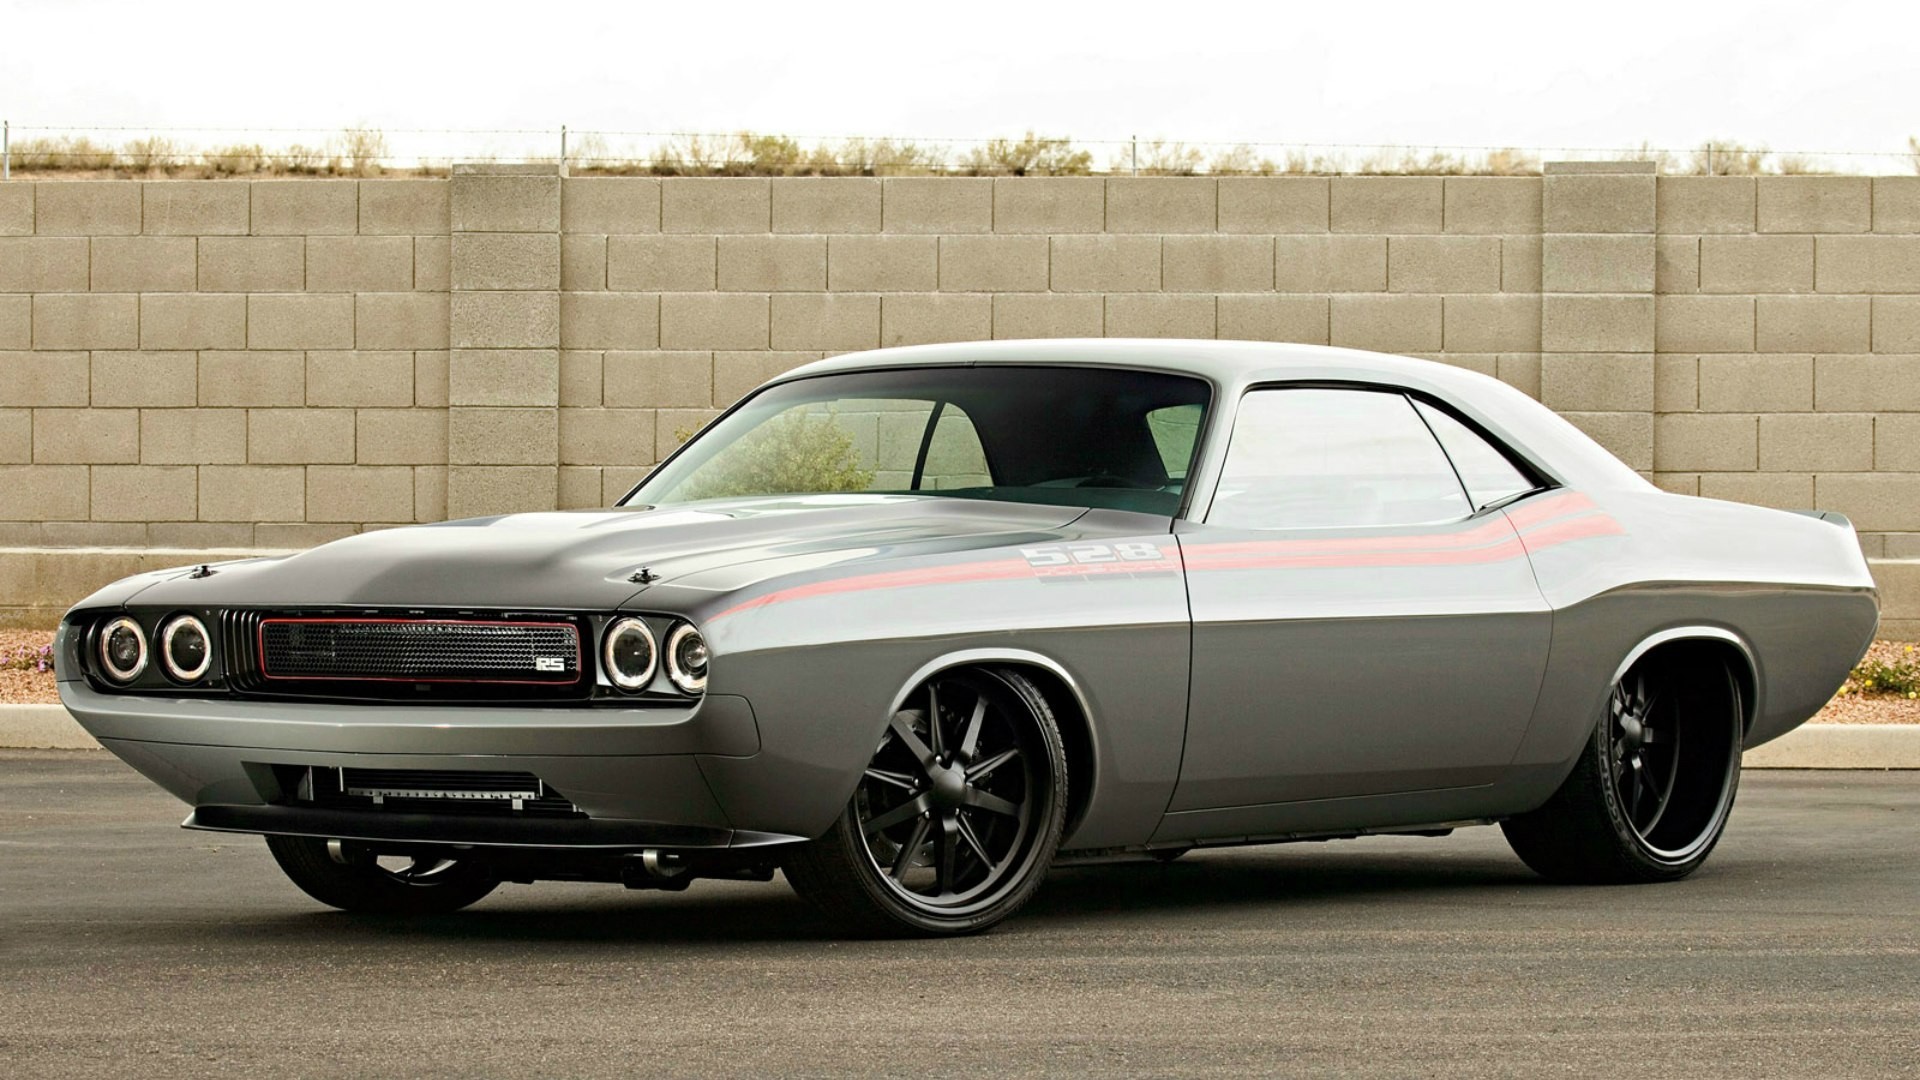 General 1920x1080 car Dodge Challenger vehicle silver cars Dodge muscle cars American cars